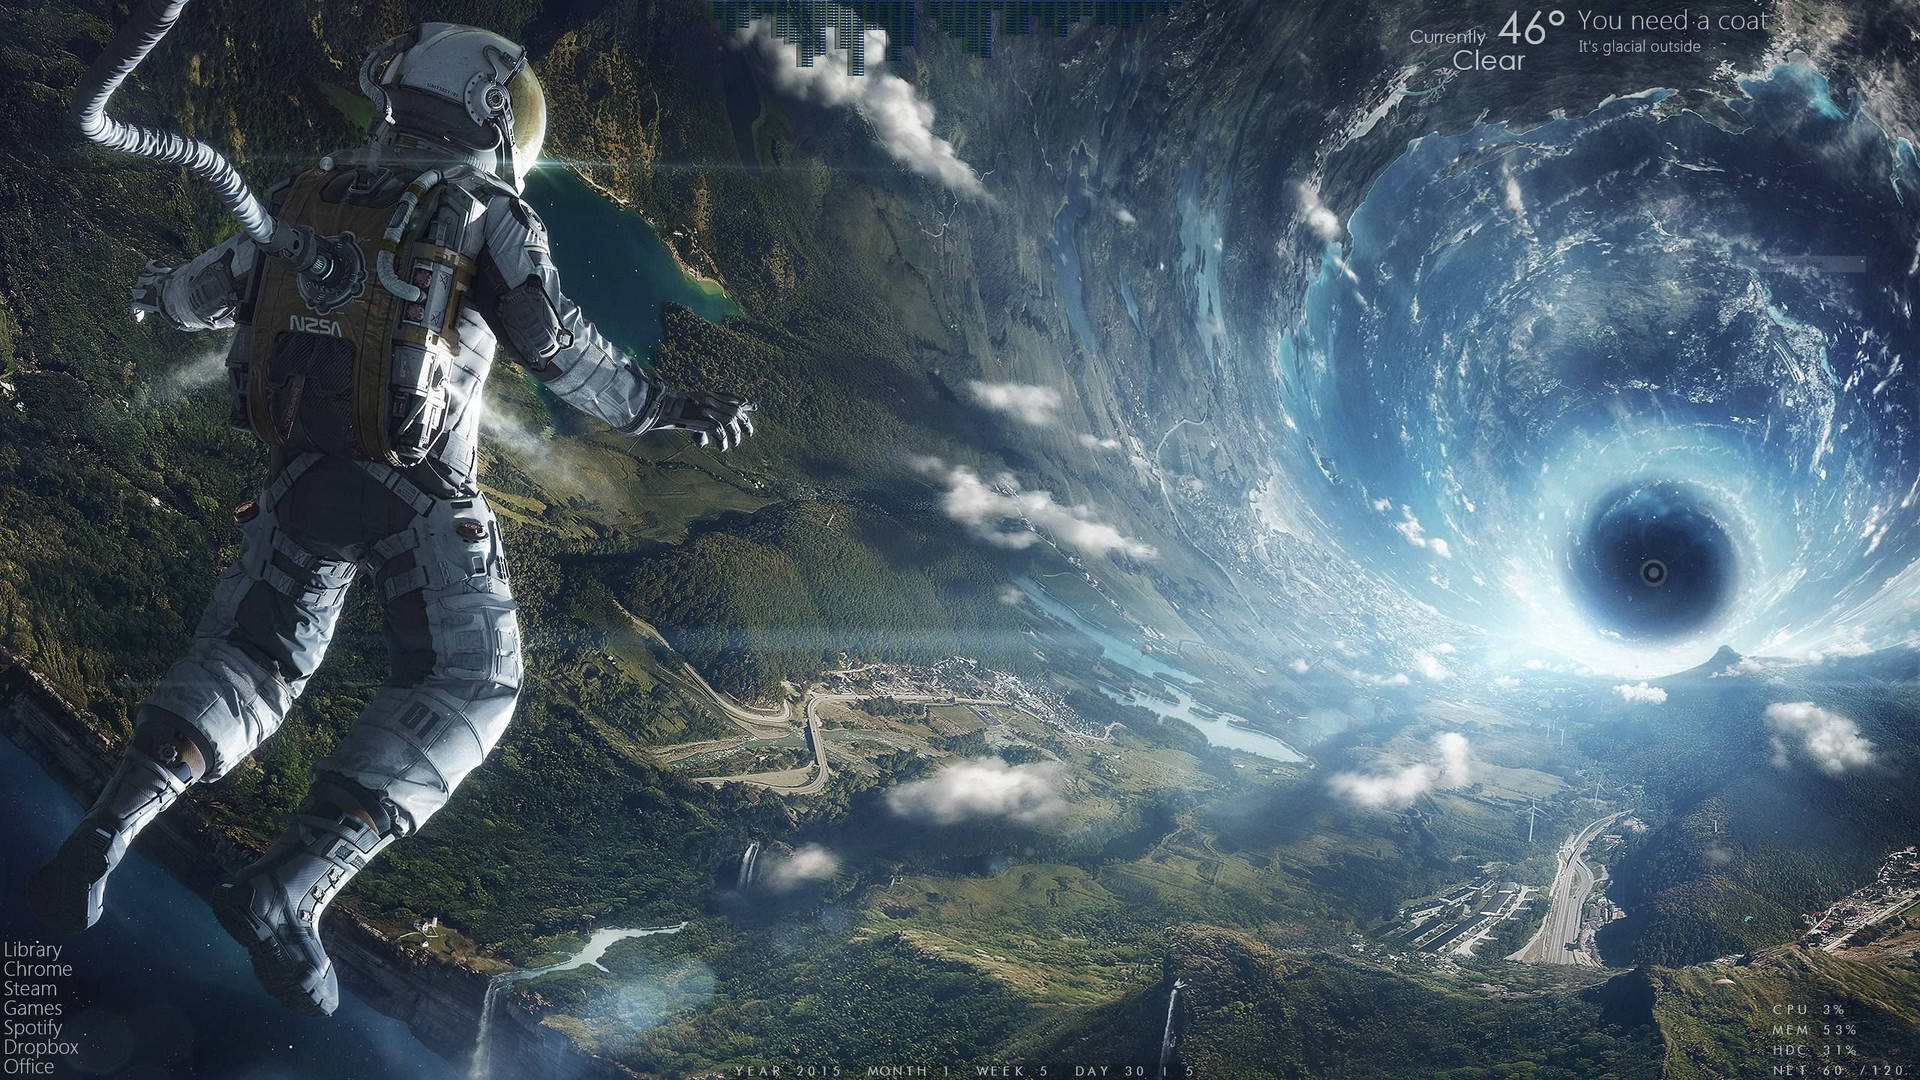 Caption: Deep Space Adventure: Astronaut Navigating A Wormhole In 1440p Gaming Resolution Wallpaper